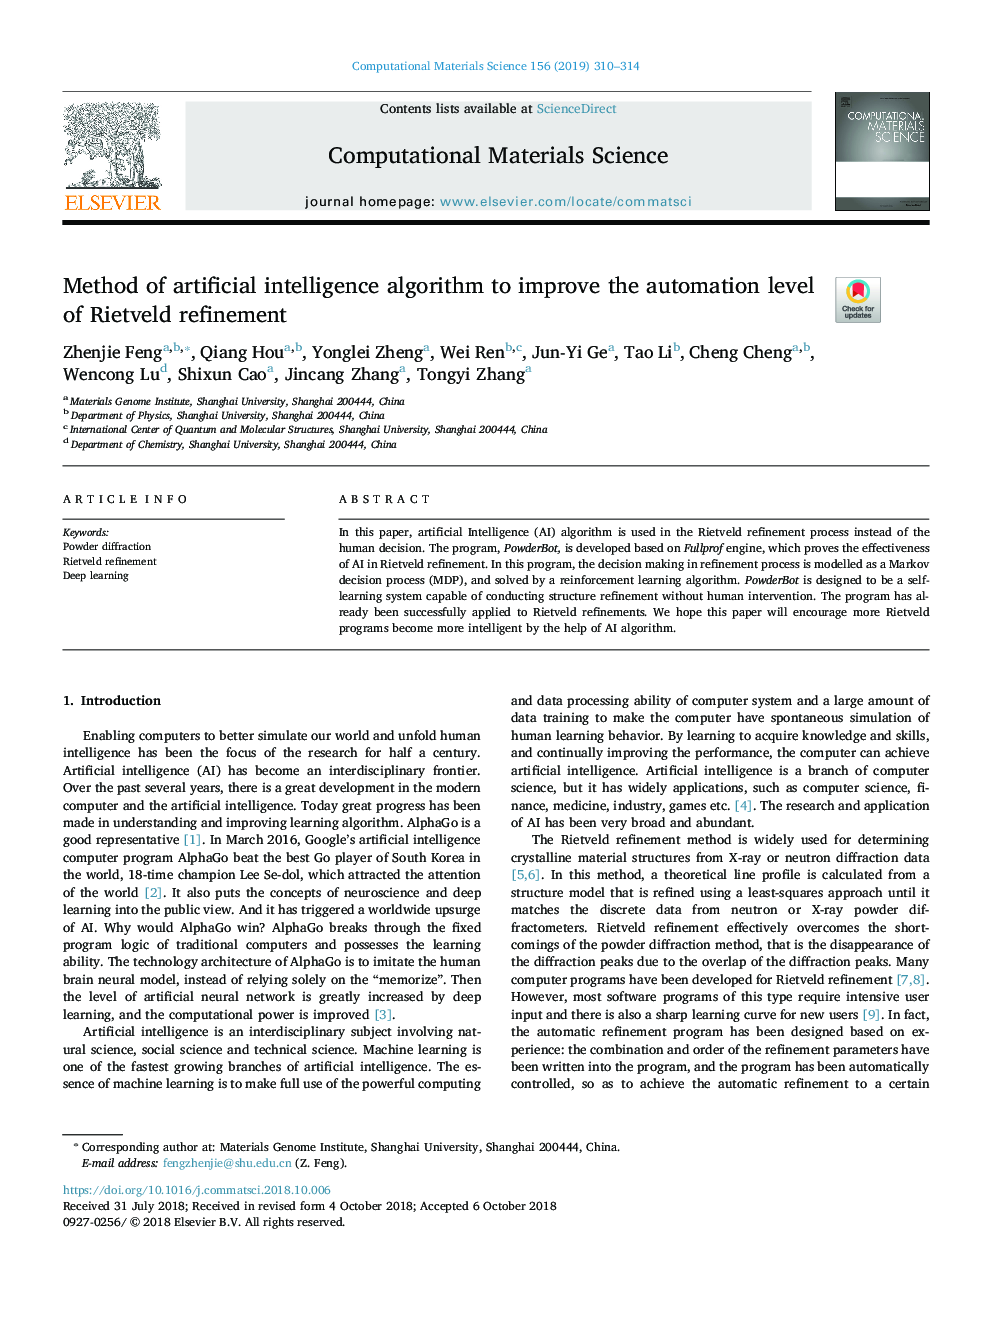 Method of artificial intelligence algorithm to improve the automation level of Rietveld refinement